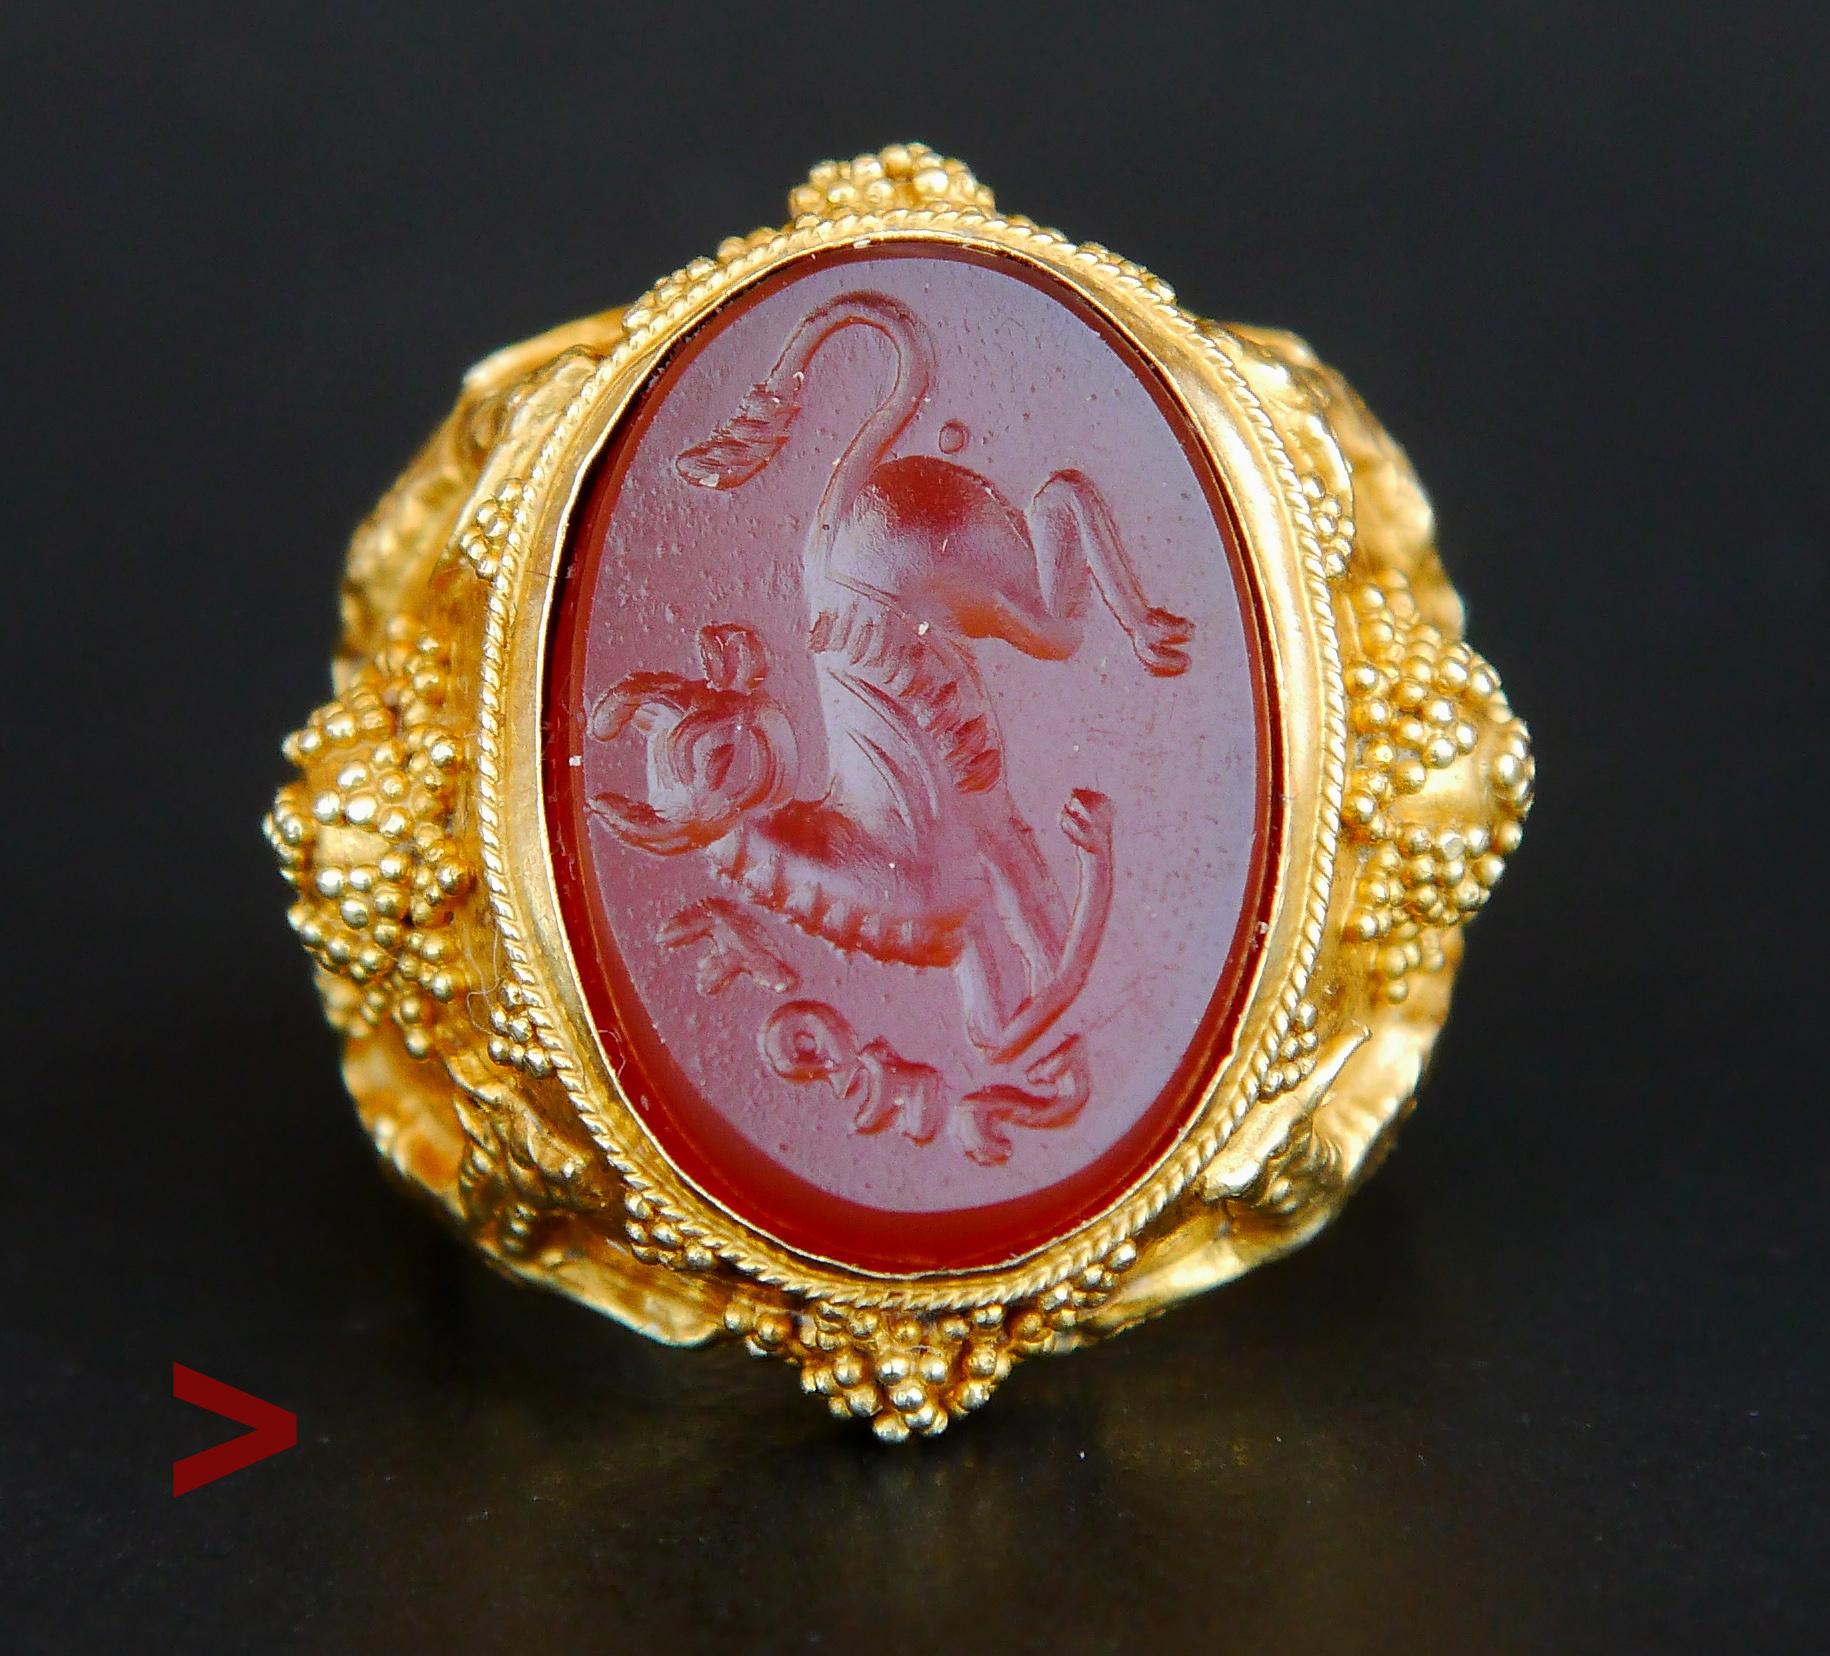 Unusual antique Gold and Carnelian Signet Ring with fine hand-carved intaglio of Taurus or Bull / Baal ? with short inscription in an unknown tongue.

Richly decorated surfaces of the shoulders and shank: relief stars and figures of running gazelles